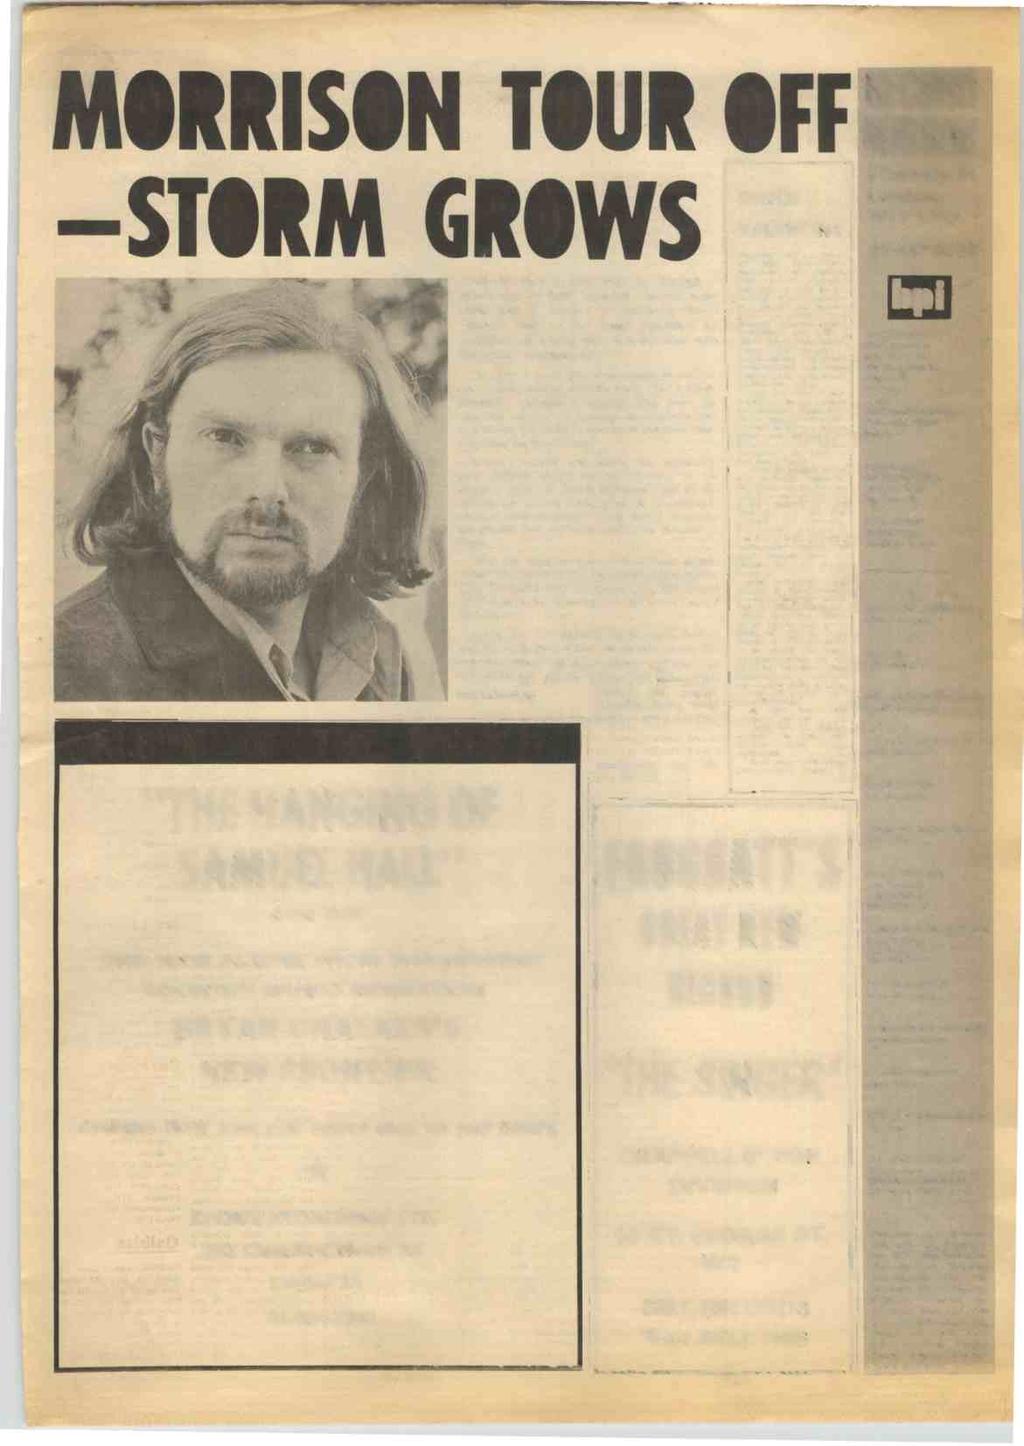 RECORD MIRROR, May 15, 1971 7 MORRISON TOUR OFF MIRROR STORM GRO VAN Morrison's June visit to Europe - which was to have included TV and radio dates and a concert at London's Royal Festival Hall -